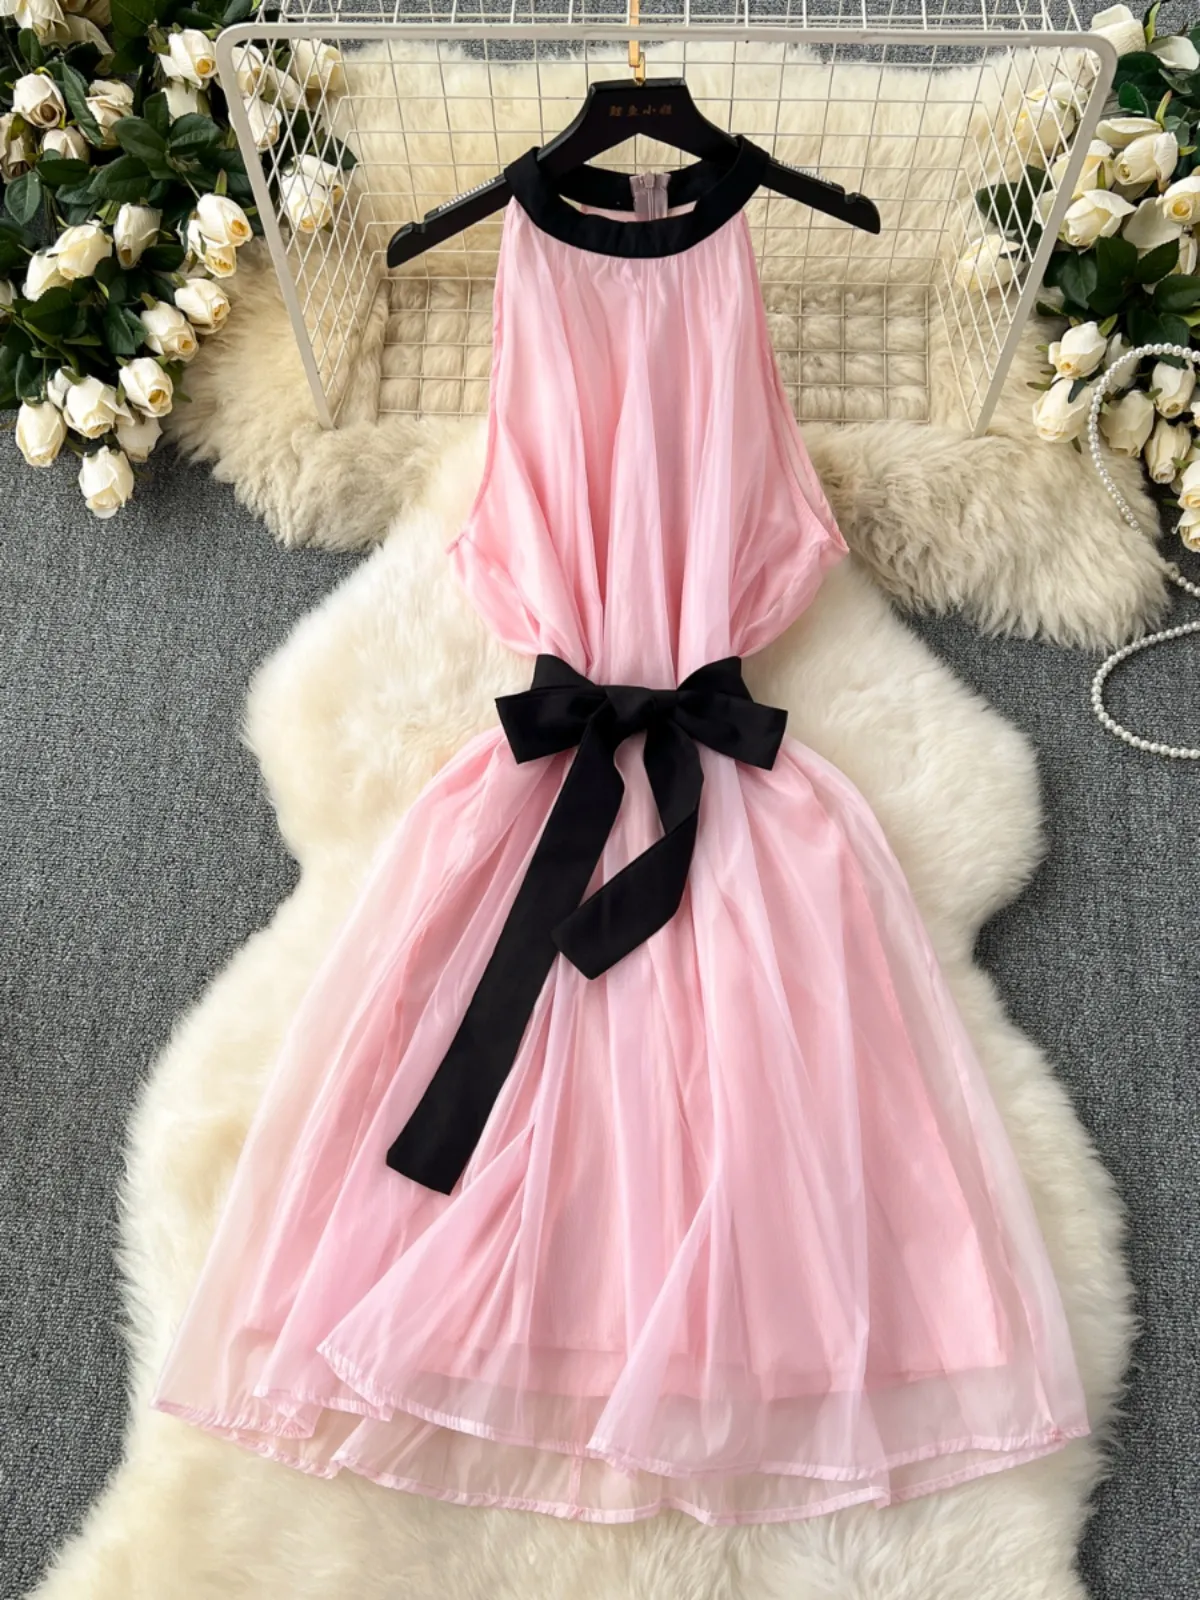 Pink neckline mesh dress for women with small stature wearing in summer, pure desire style, tie up waist, elegant sleeveless dress